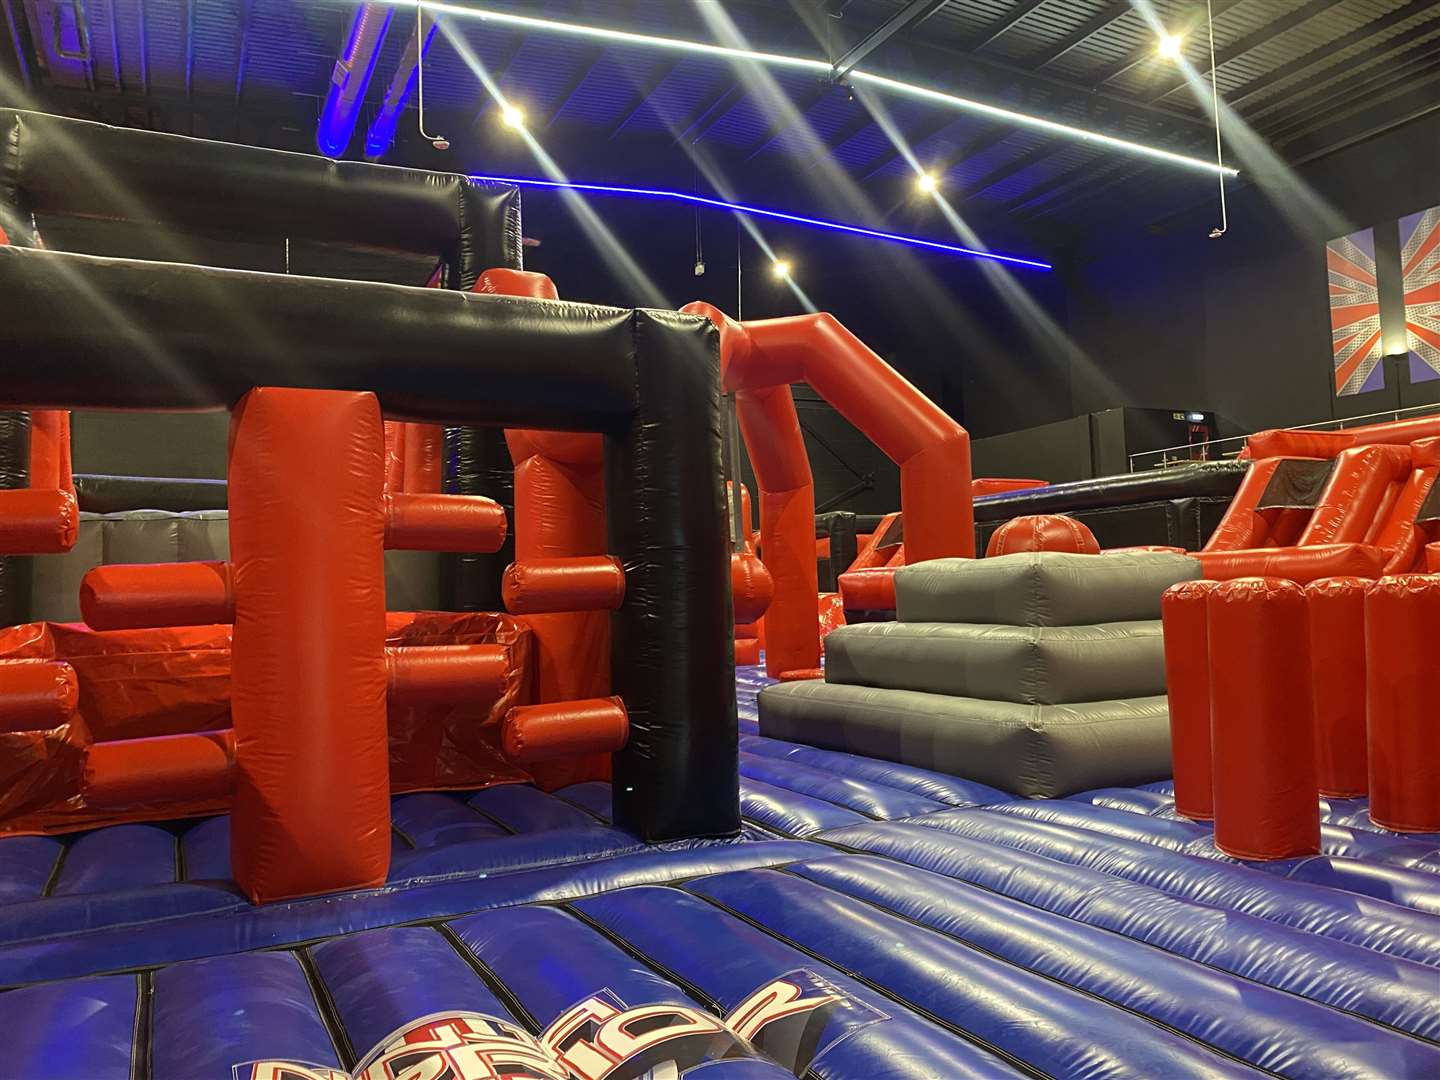 The inflatable course